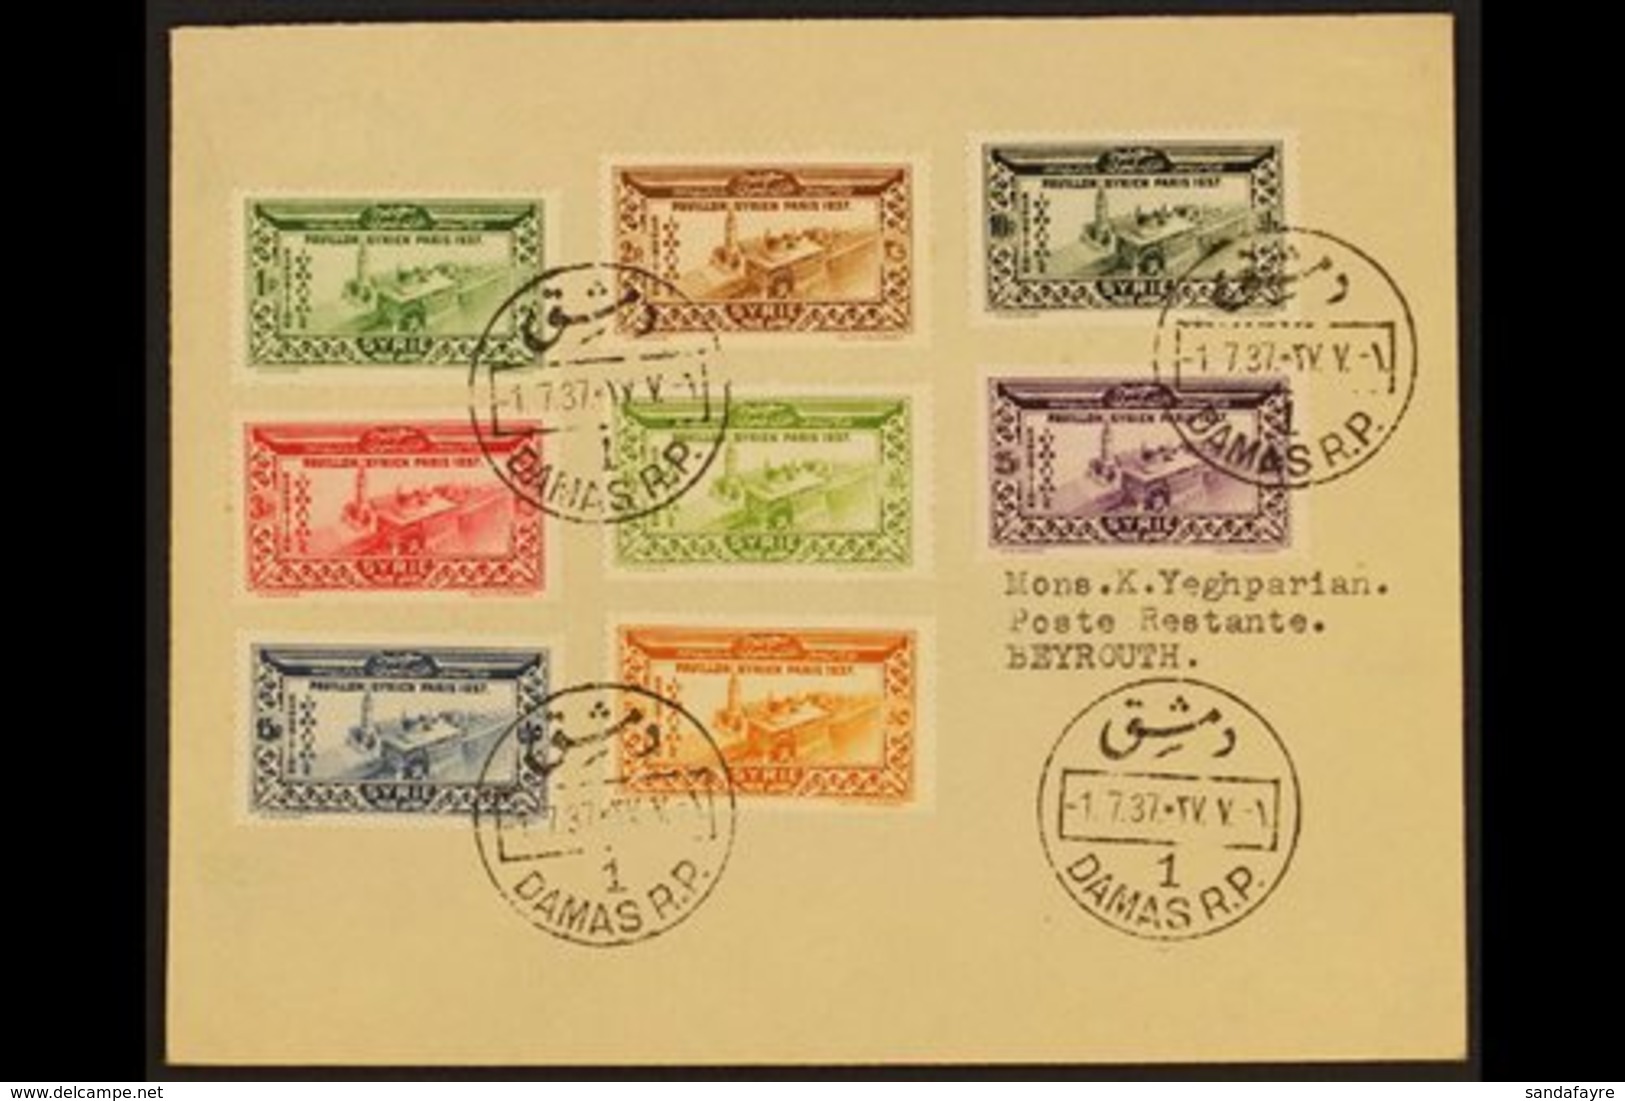 1937 Paris International Expo, Airmail Set, SG 314/21, Very Fine Uised On FDC To Bayrouth. For More Images, Please Visit - Syrië